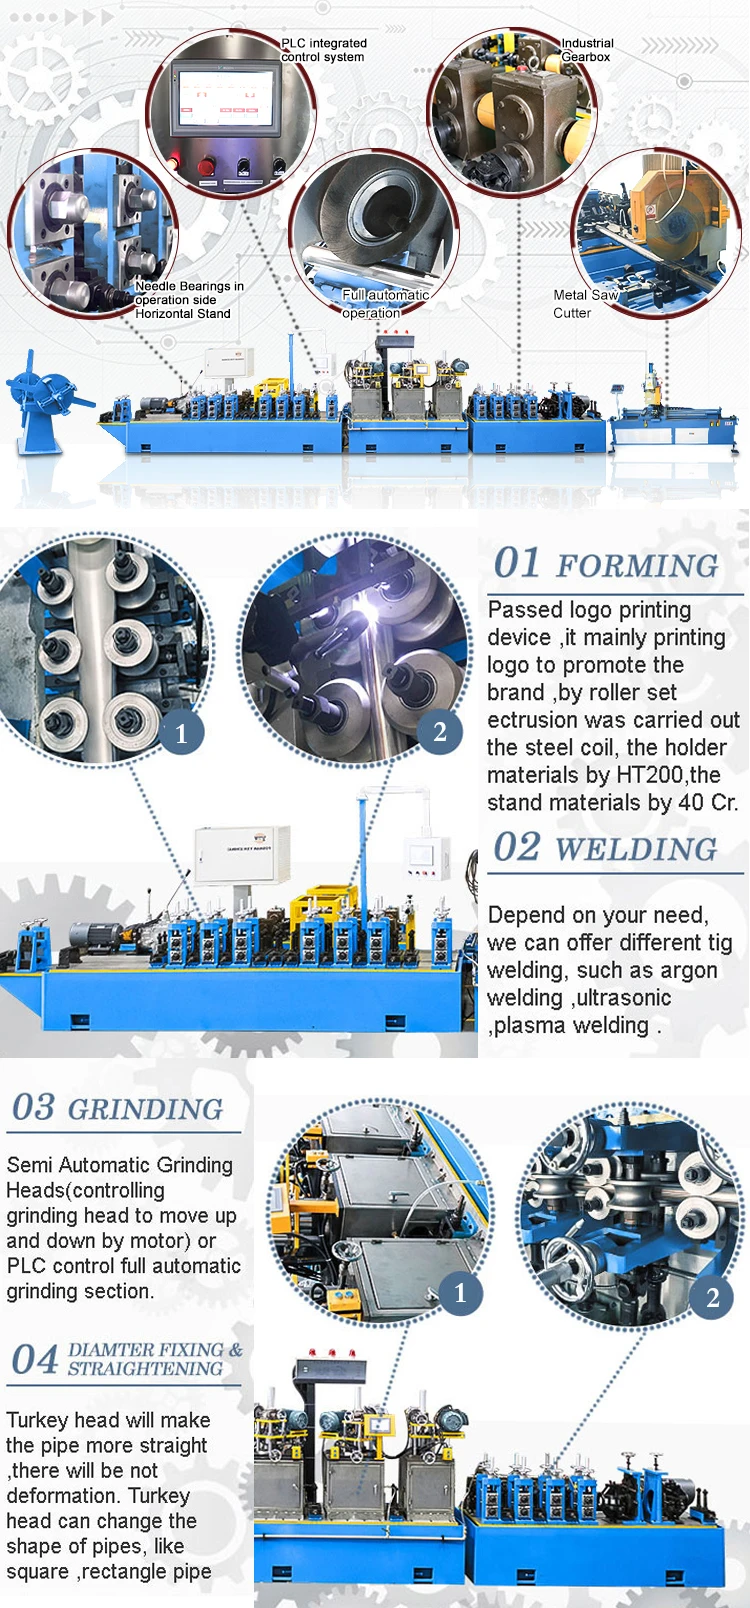 Foshan CS/Carbon/Stainless Steel/Iron Welded Round Tube Pipe Production Line Pipe Making Machinery